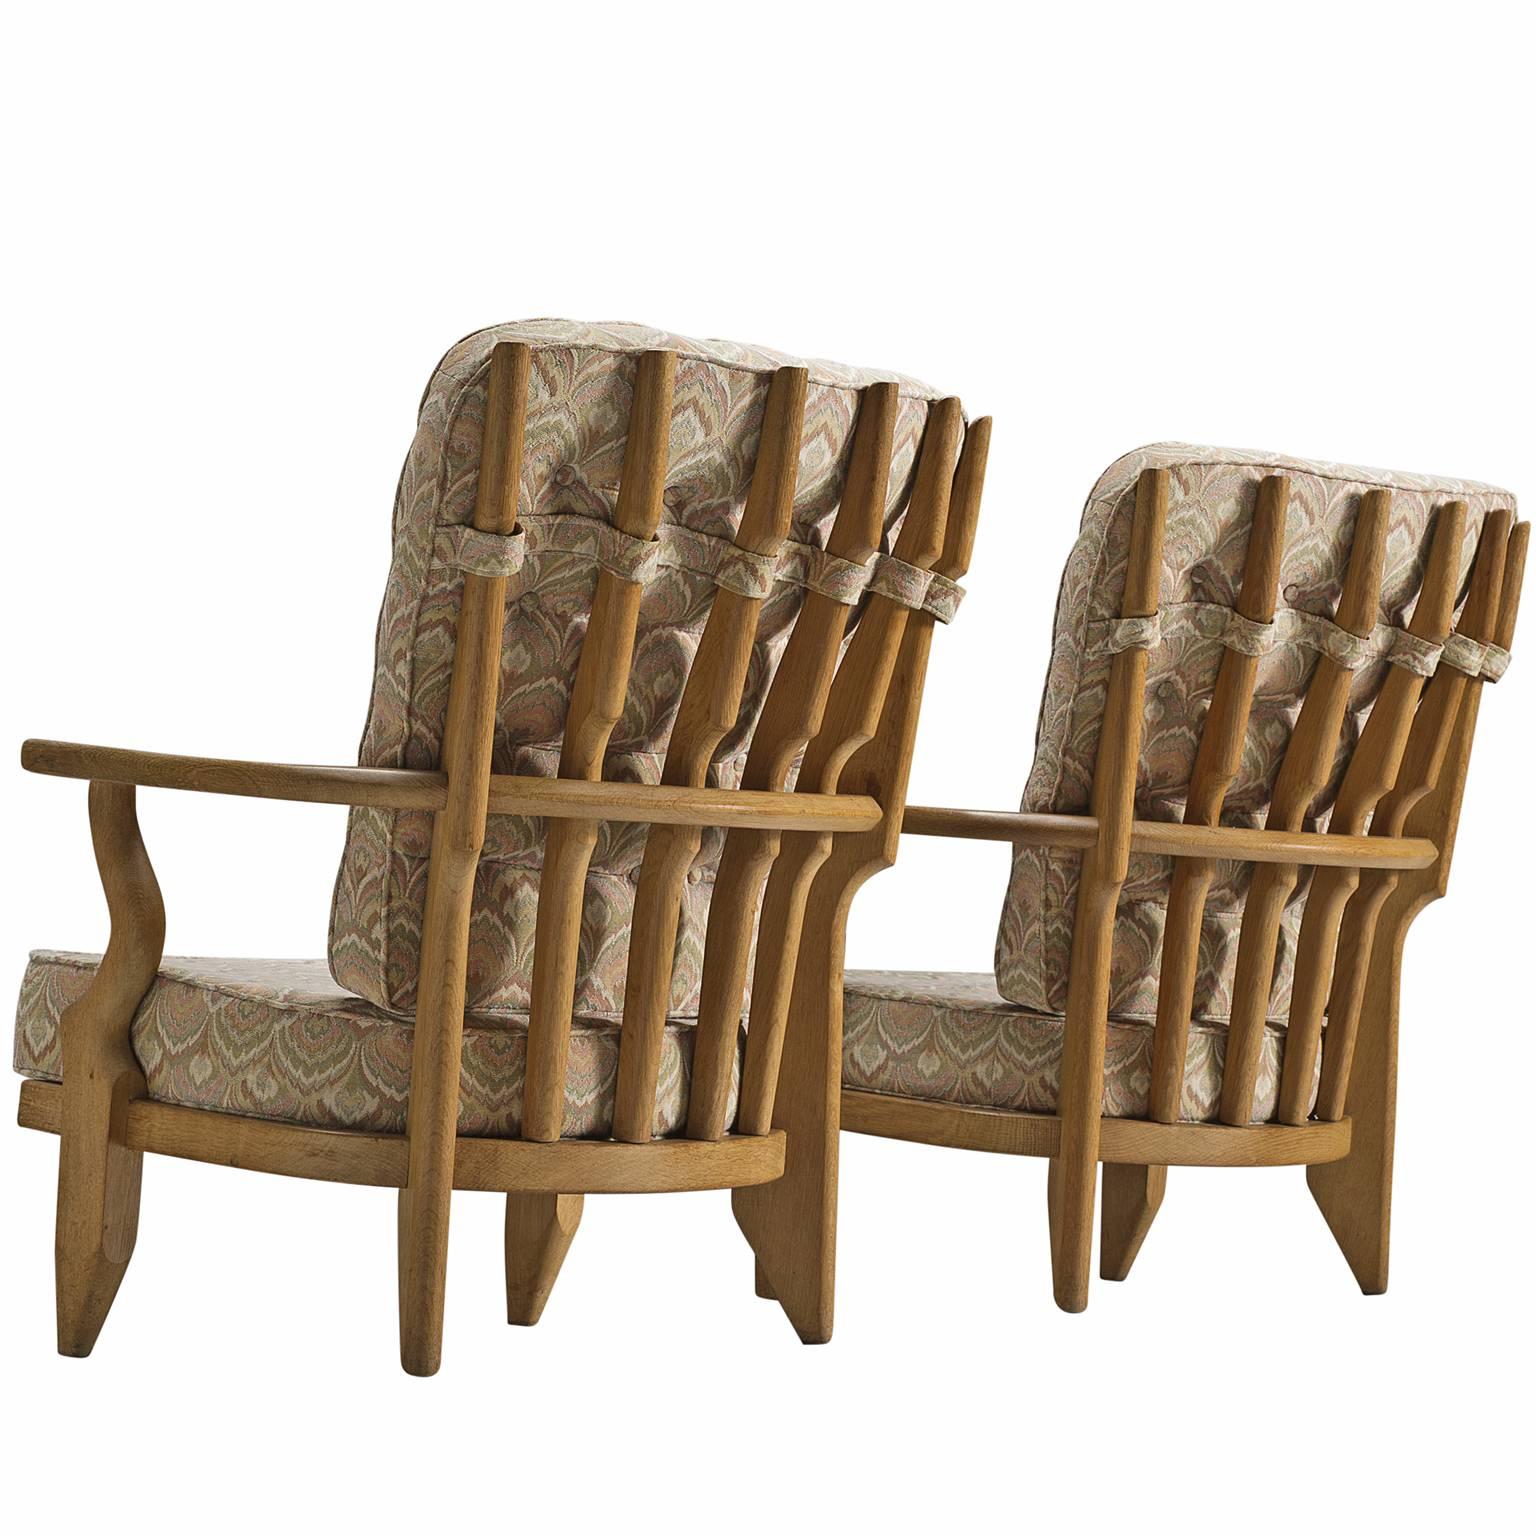 Guillerme & Chambron Carved Oak High Back Chairs